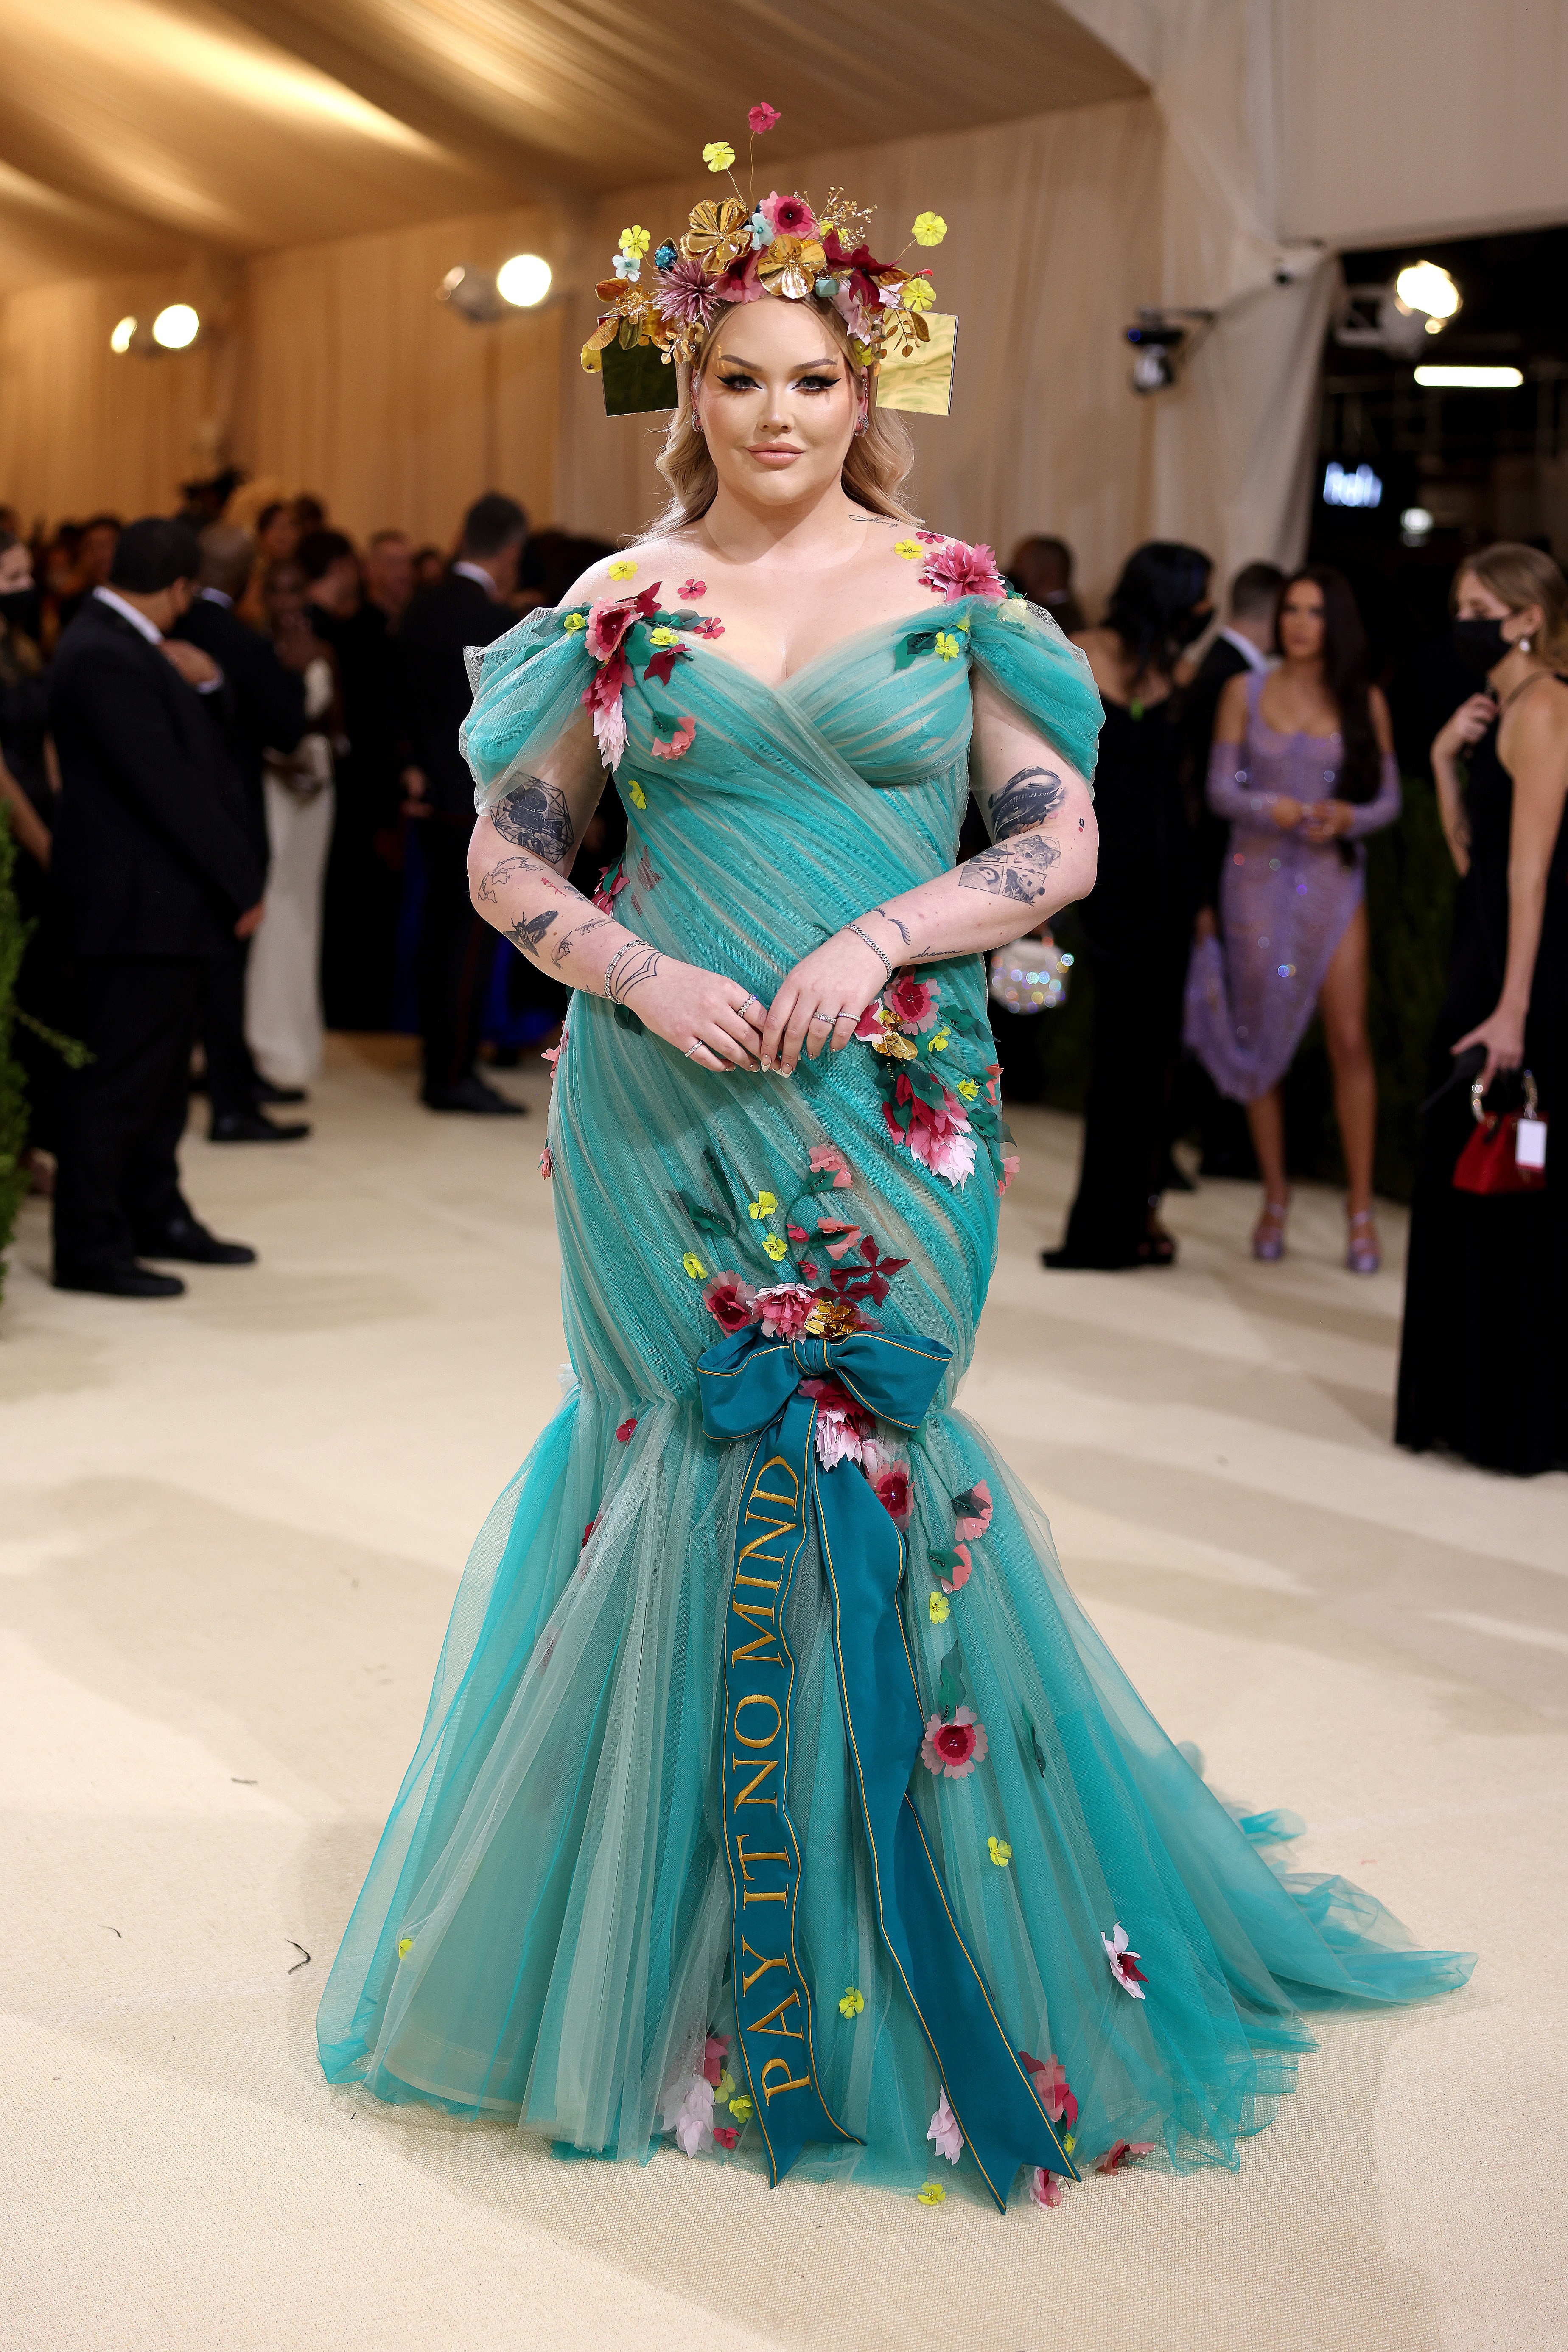 NEW YORK, NEW YORK - SEPTEMBER 13: Nikkie de Jager attends The 2021 Met Gala Celebrating In America: A Lexicon Of Fashion at Metropolitan Museum of Art on September 13, 2021 in New York City. (Photo by John Shearer/WireImage) (Foto: WireImage)